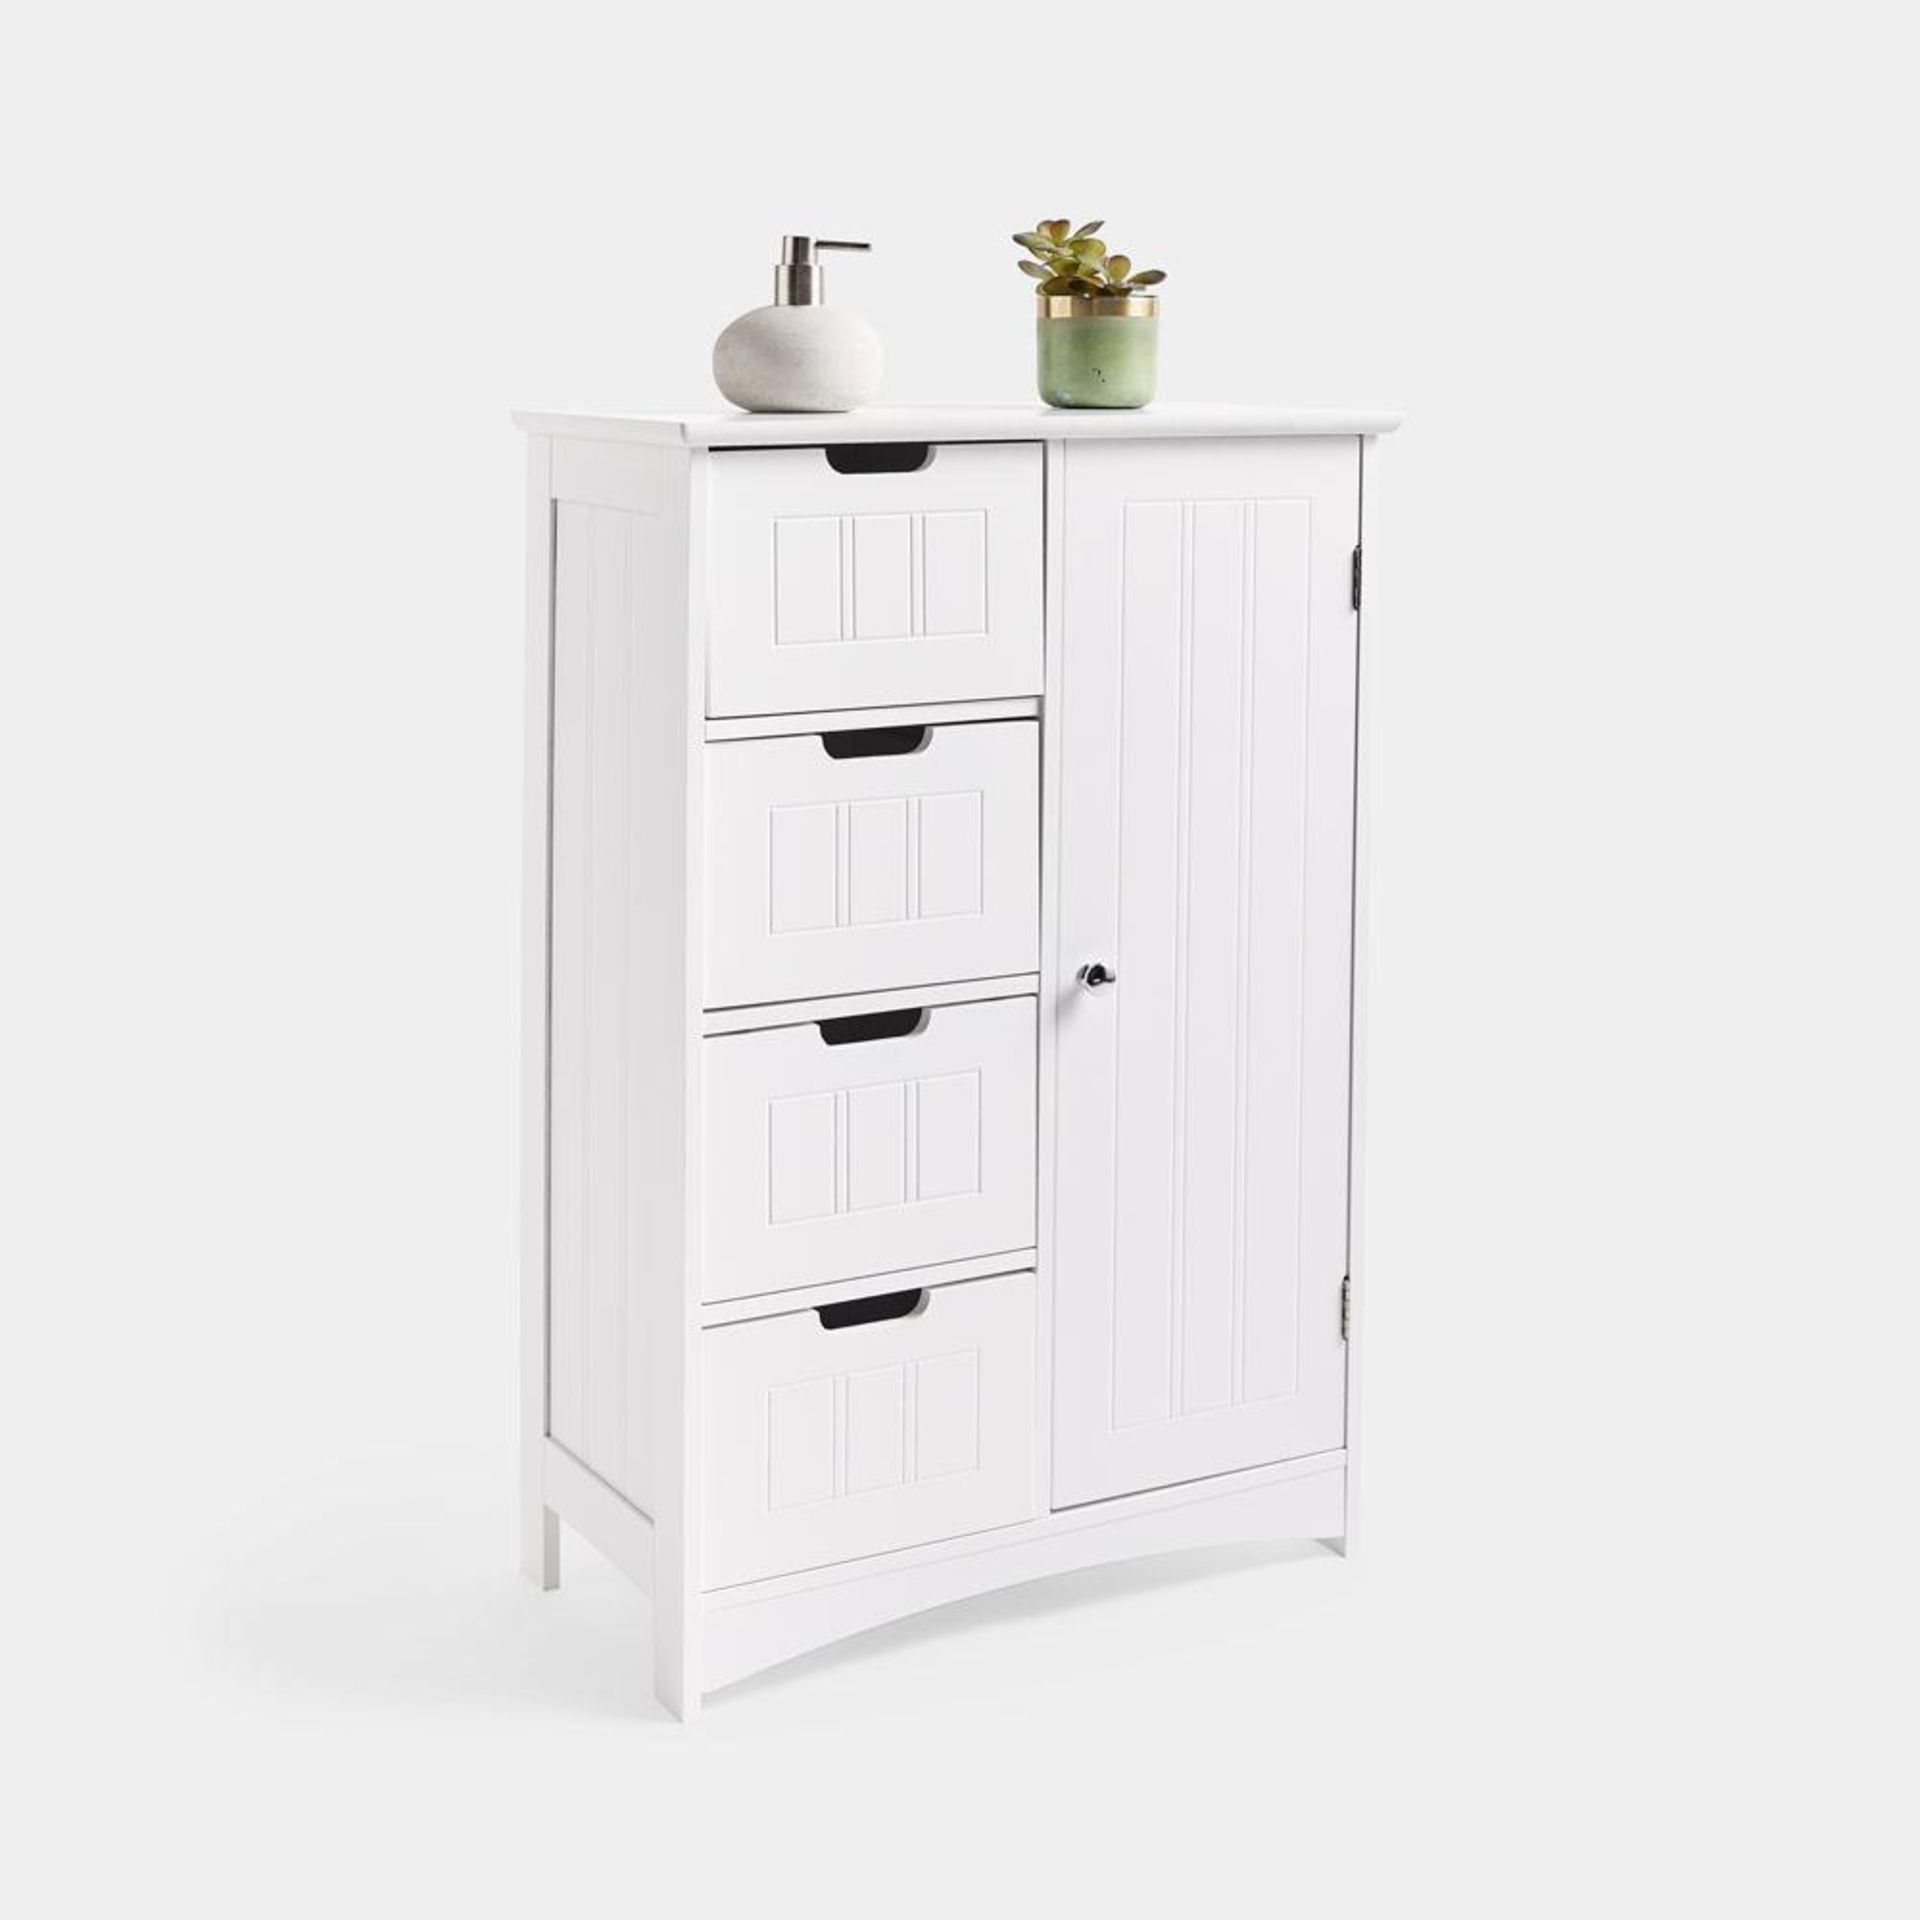 Colonial White Large Cabinet - BW. Colonial Style White 4 Drawer Storage UnitAdd a little colonial